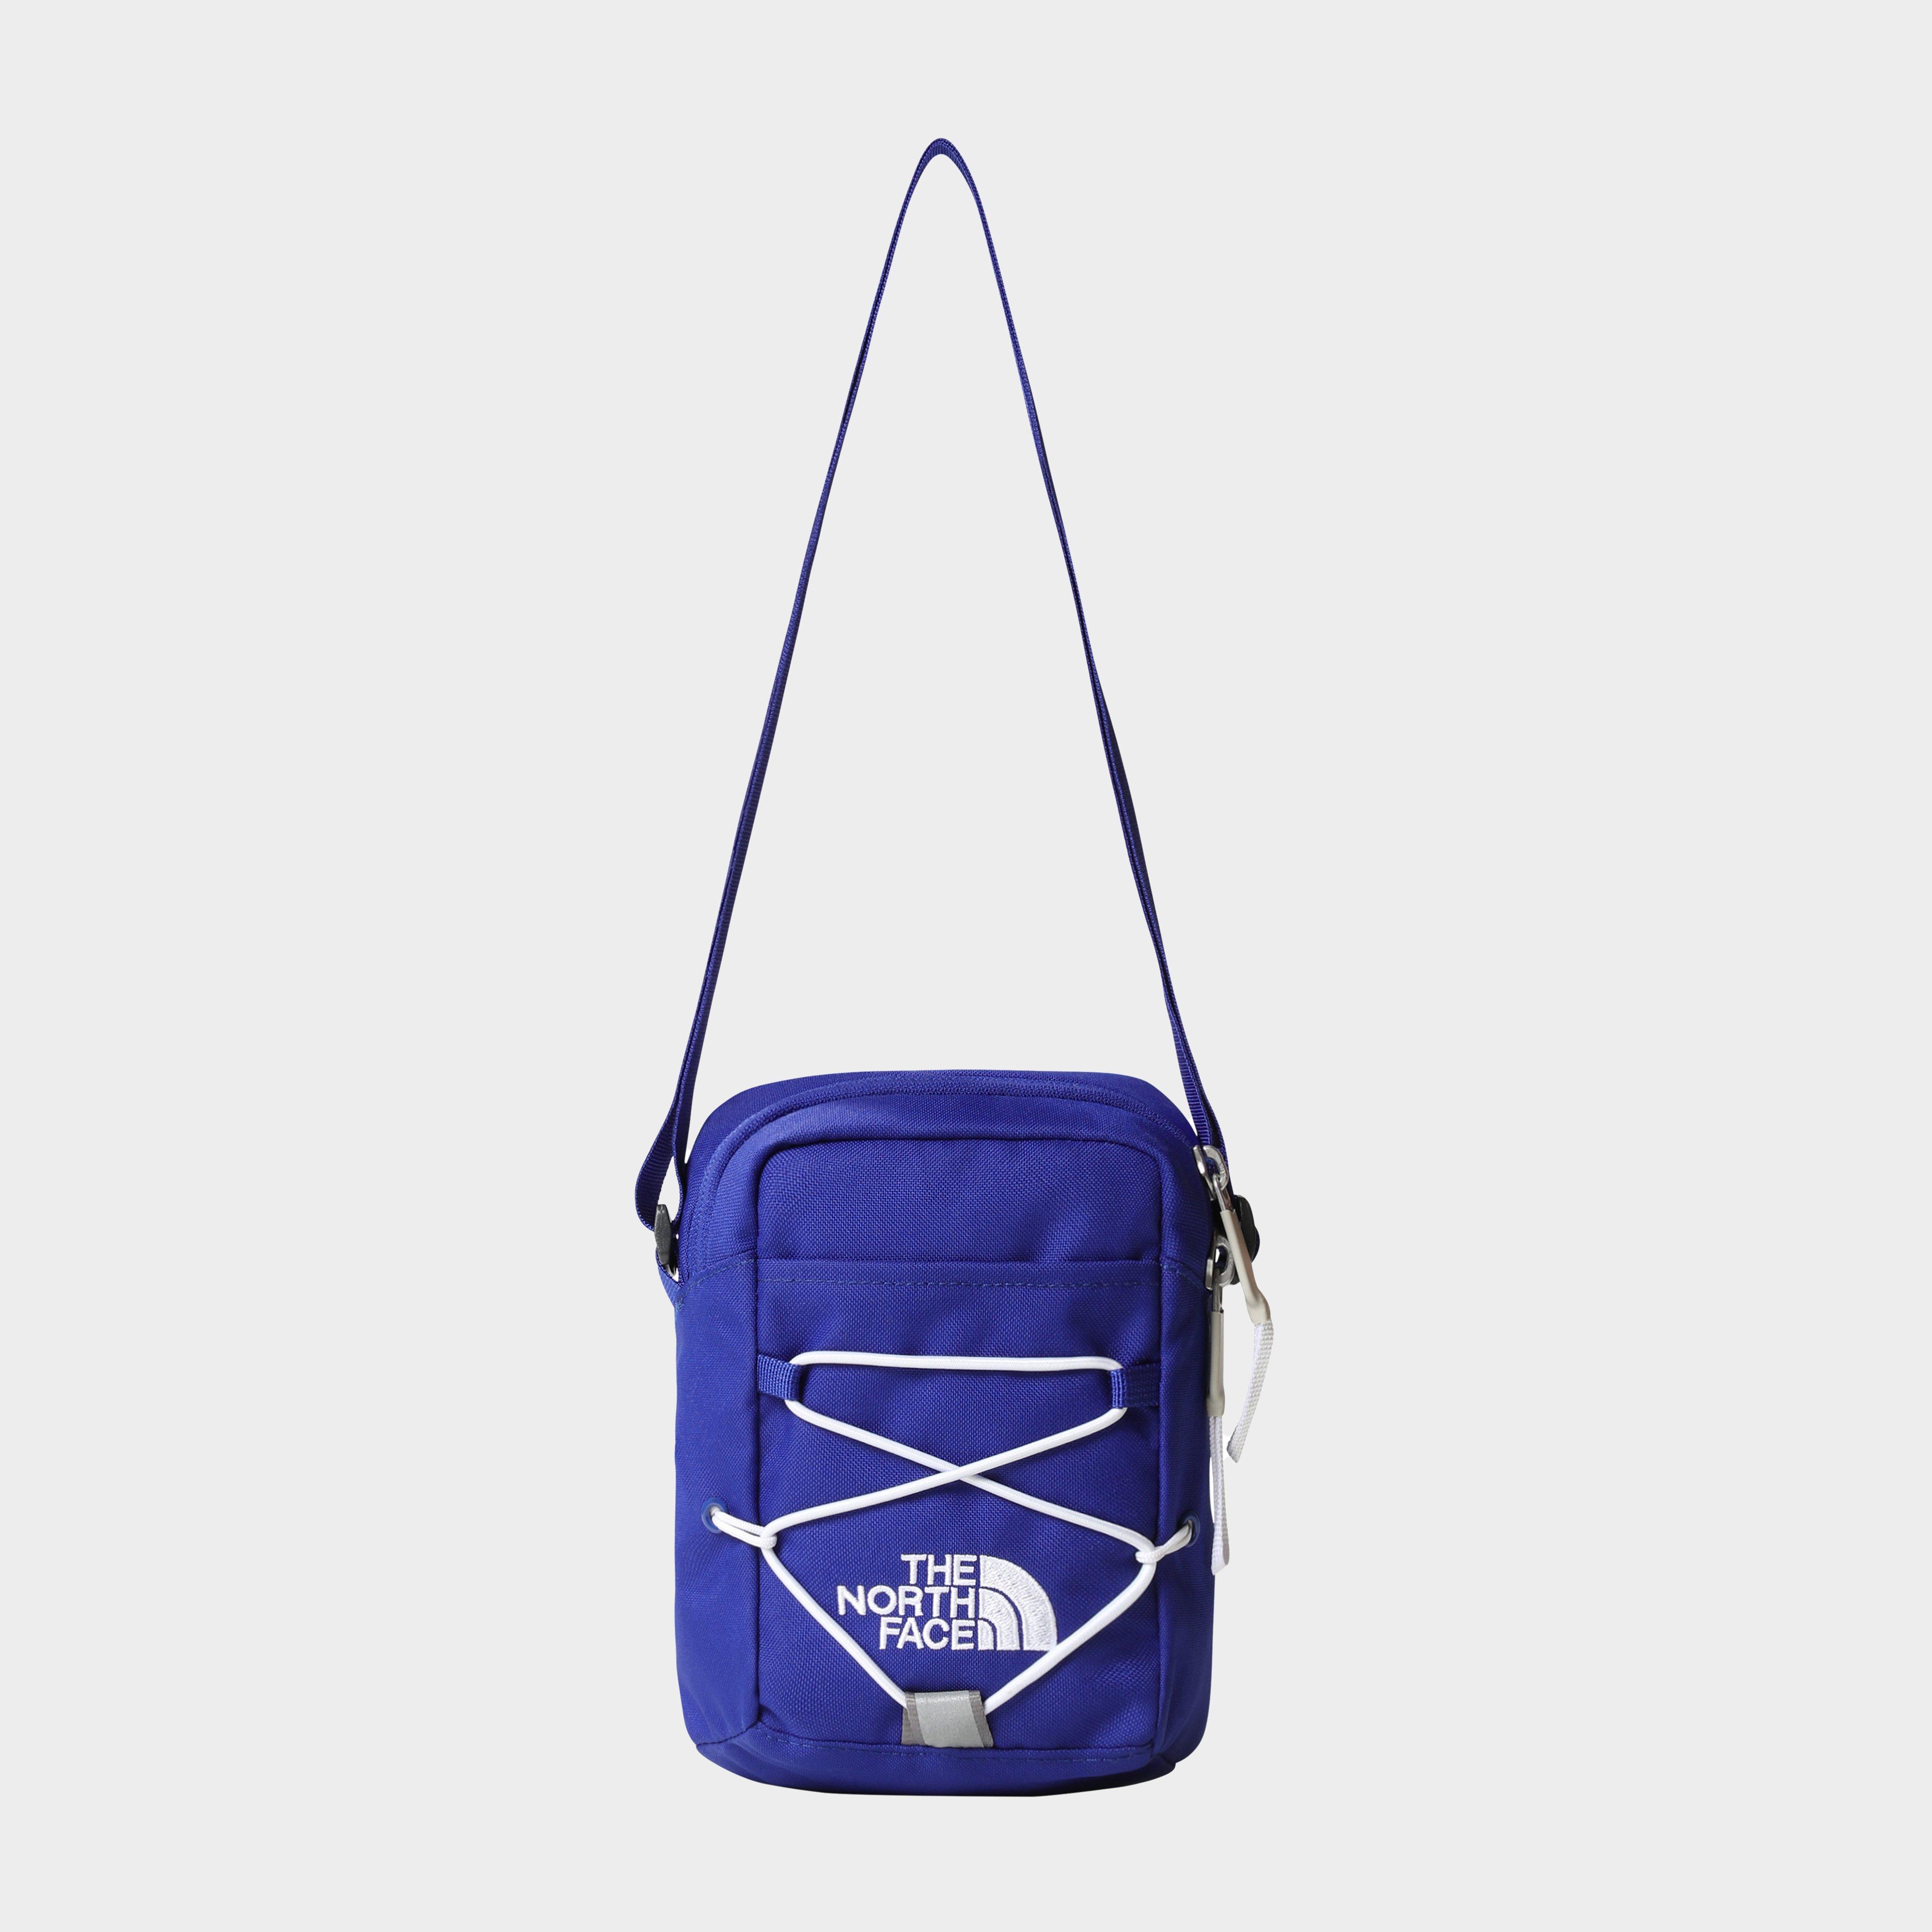 The North Face Jester Cross Body Bag - Blue/blue  Blue/blue